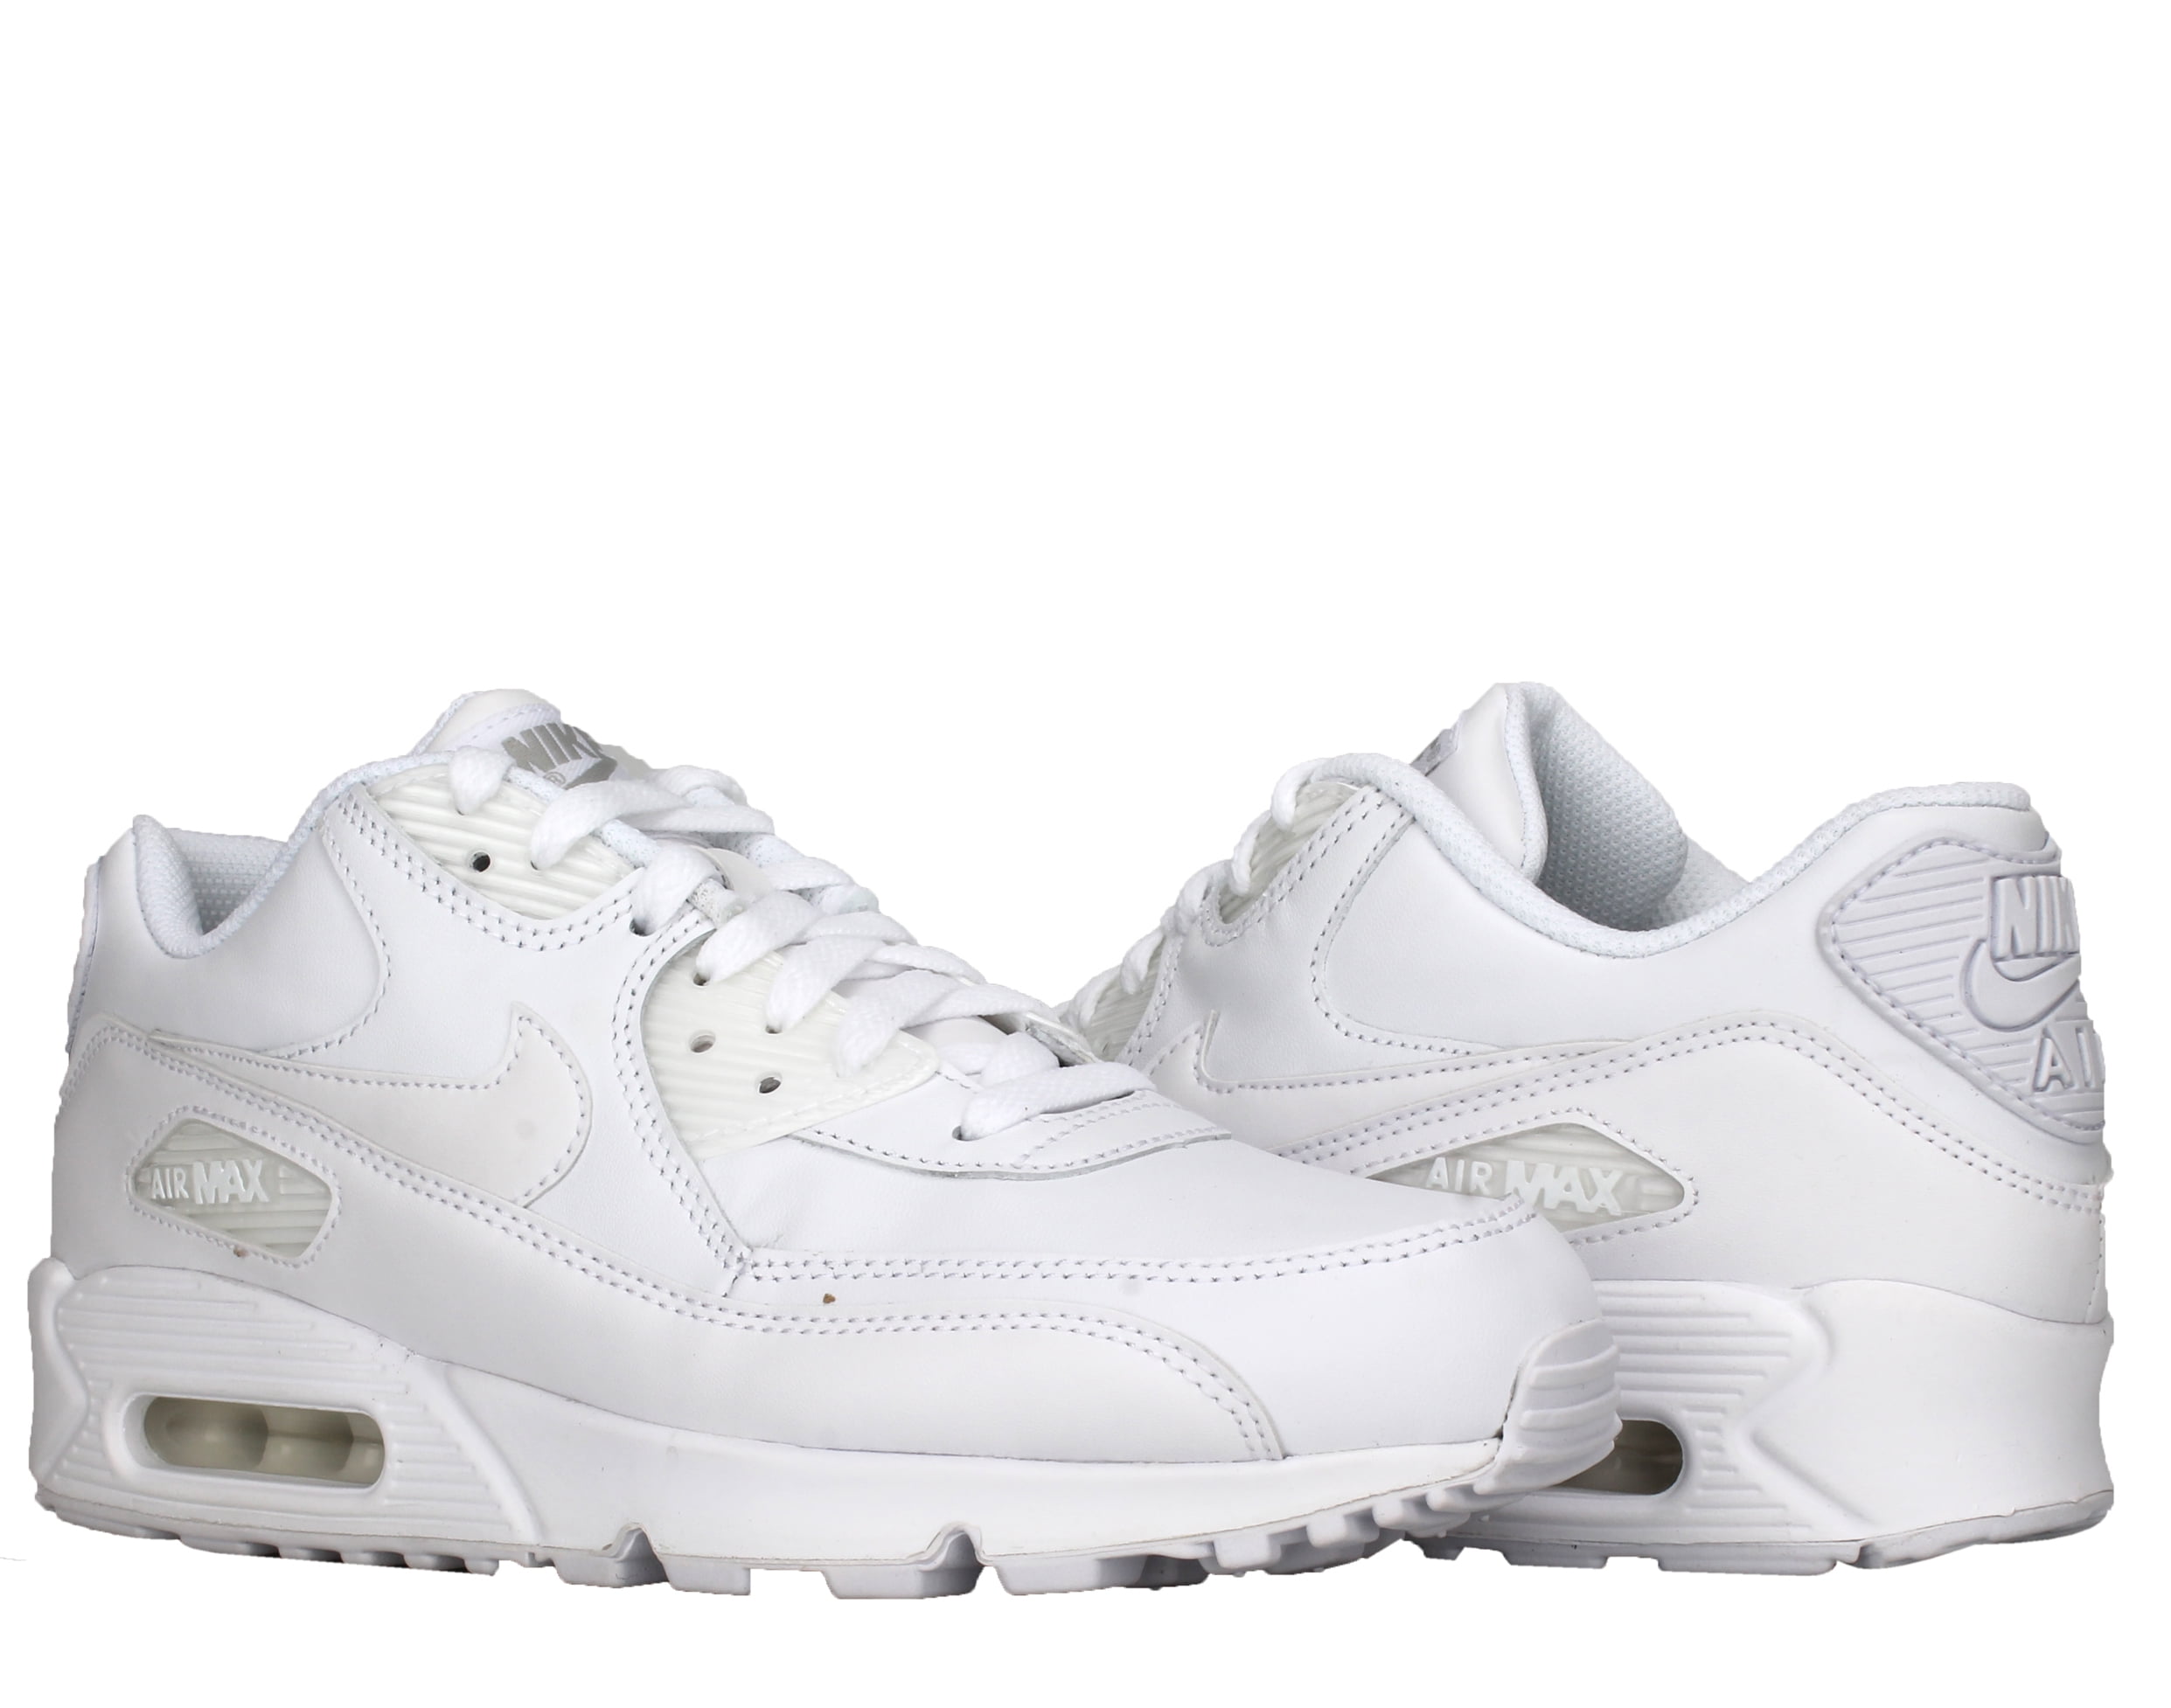 accent Beyond Verschrikking Nike Air Max 90 302519 113 Men's White Athletic Casual Lifestyle Leather  Shoes - Walmart.com